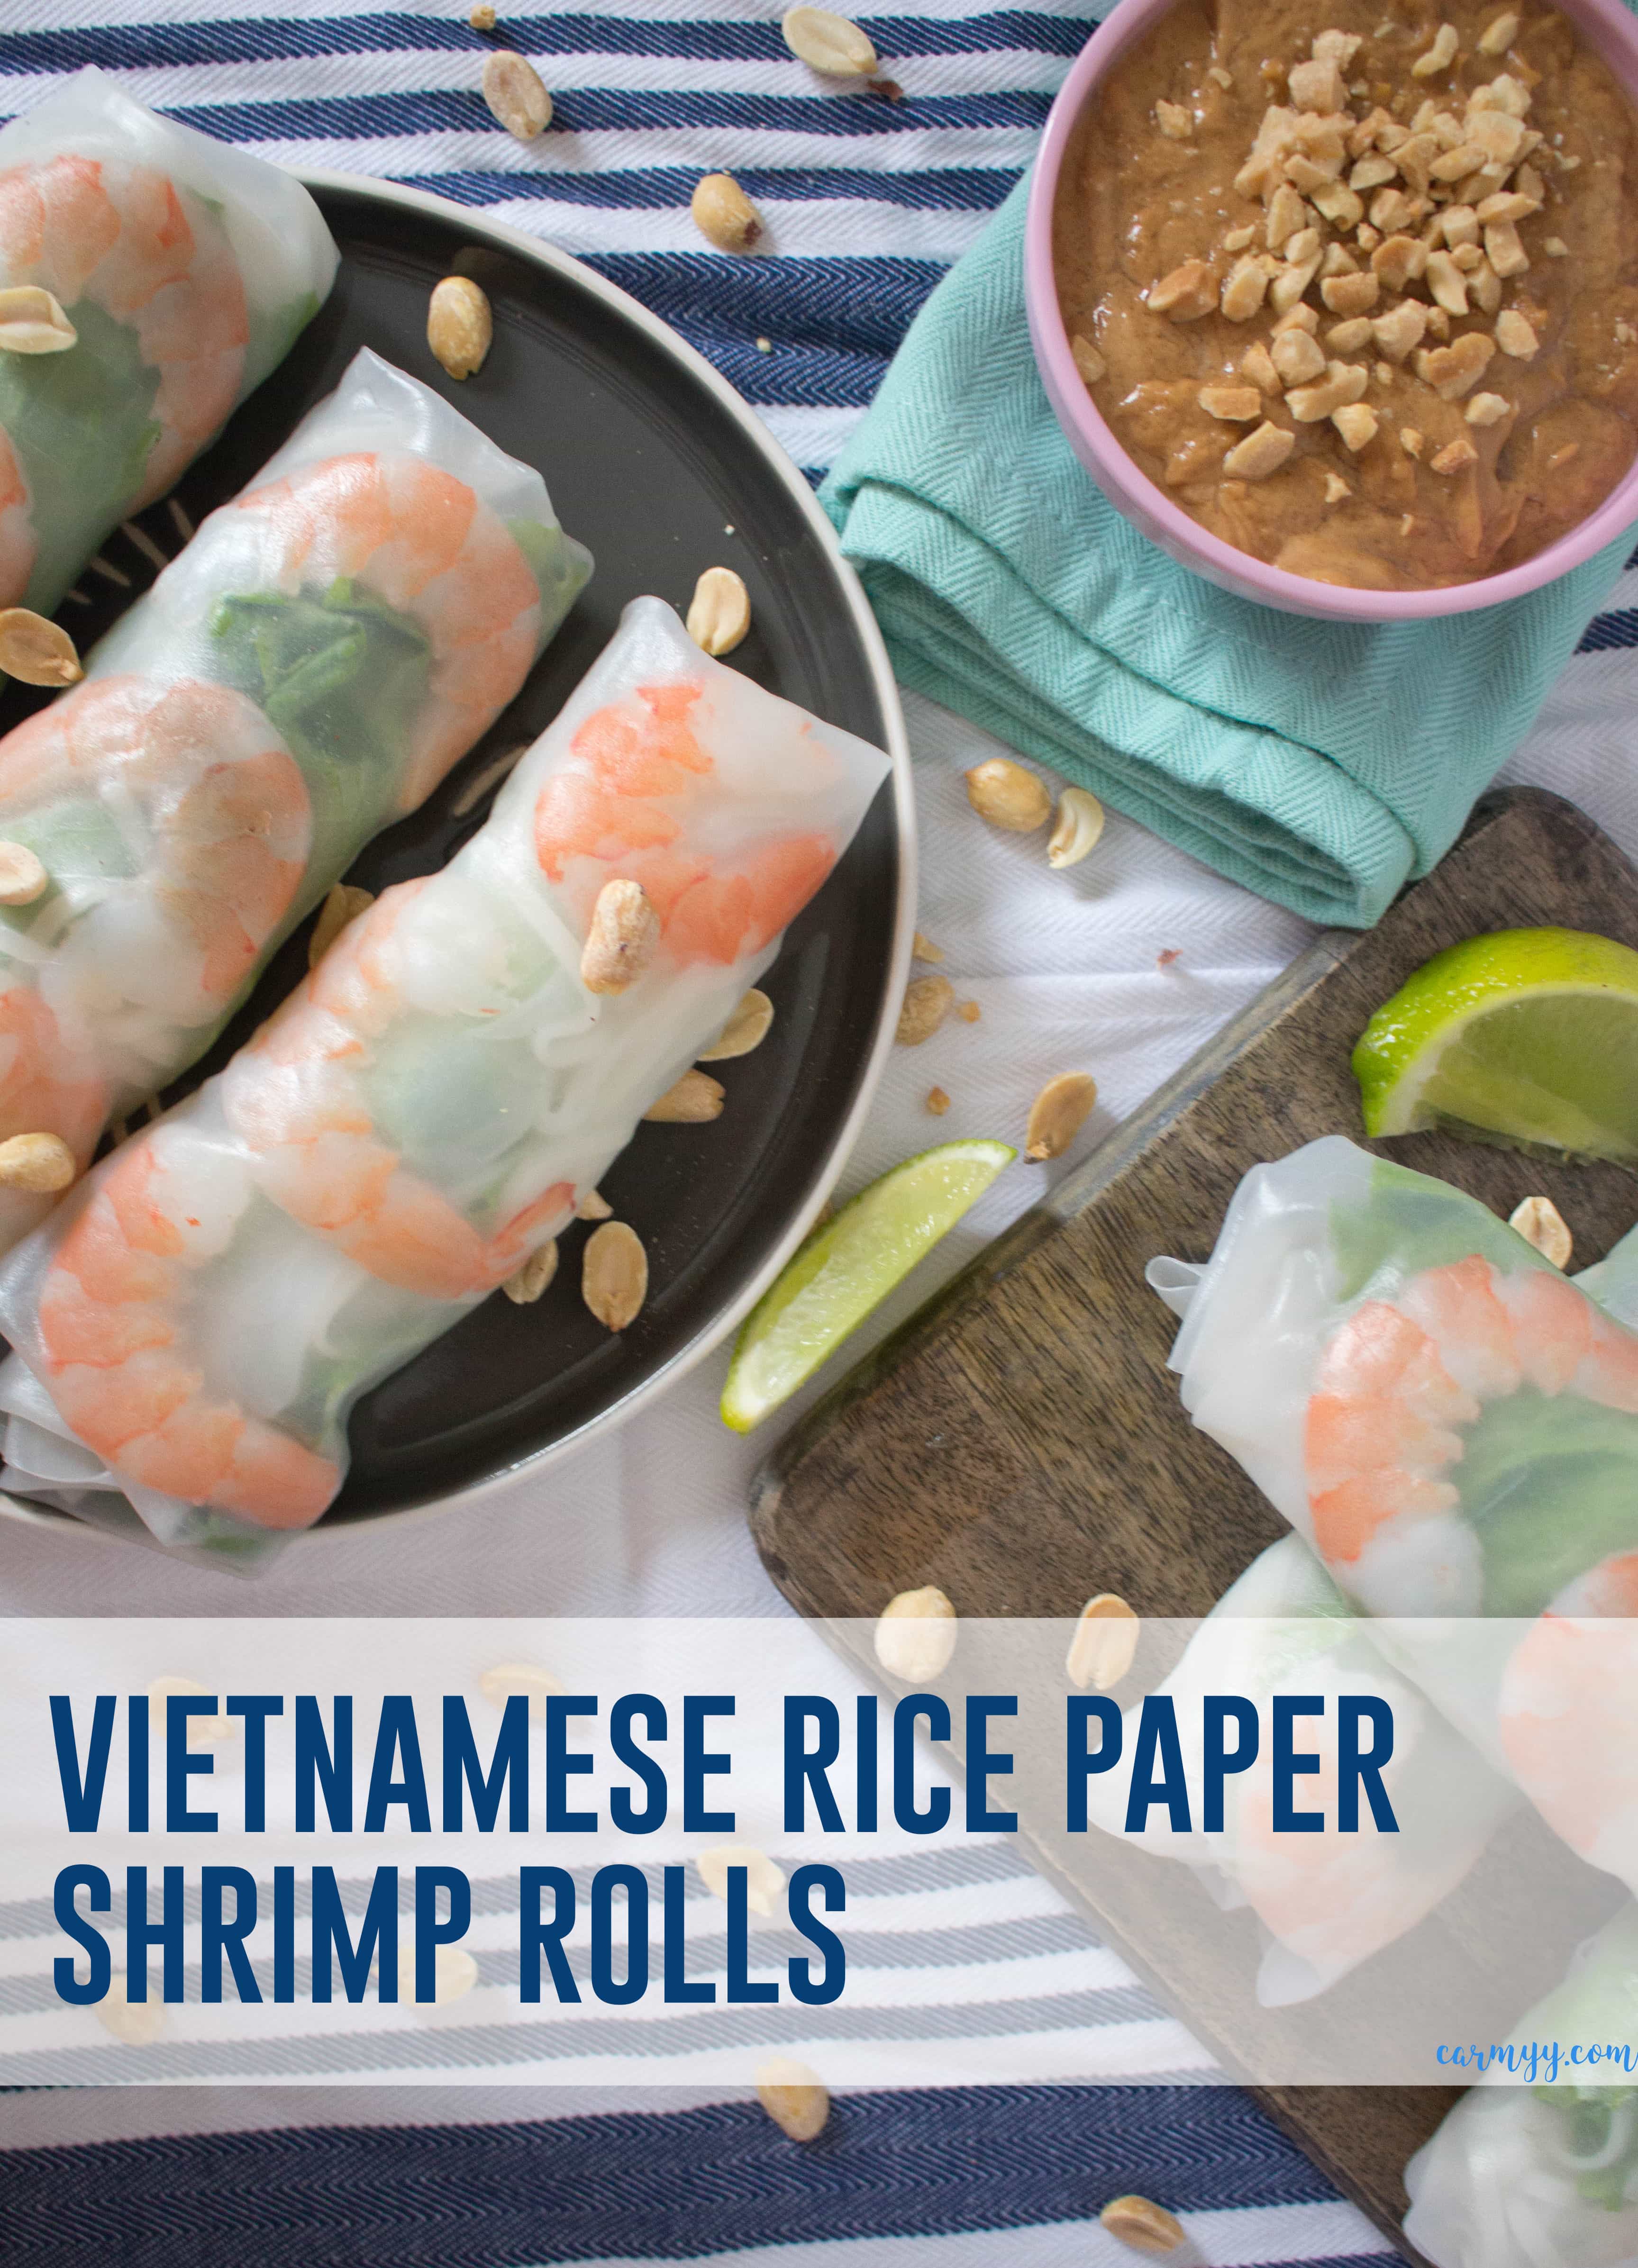 These fresh and healthy Vietnamese Rice Paper Shrimp Rolls are so easy to make! They're accompanied by my go-to creamy peanut sauce. #shrimproll #vietnamesefood #easyhealthyrecipe #easyhealthydinner #easyshrimprecipe #healthyrecipe #healthyeasyrecipe